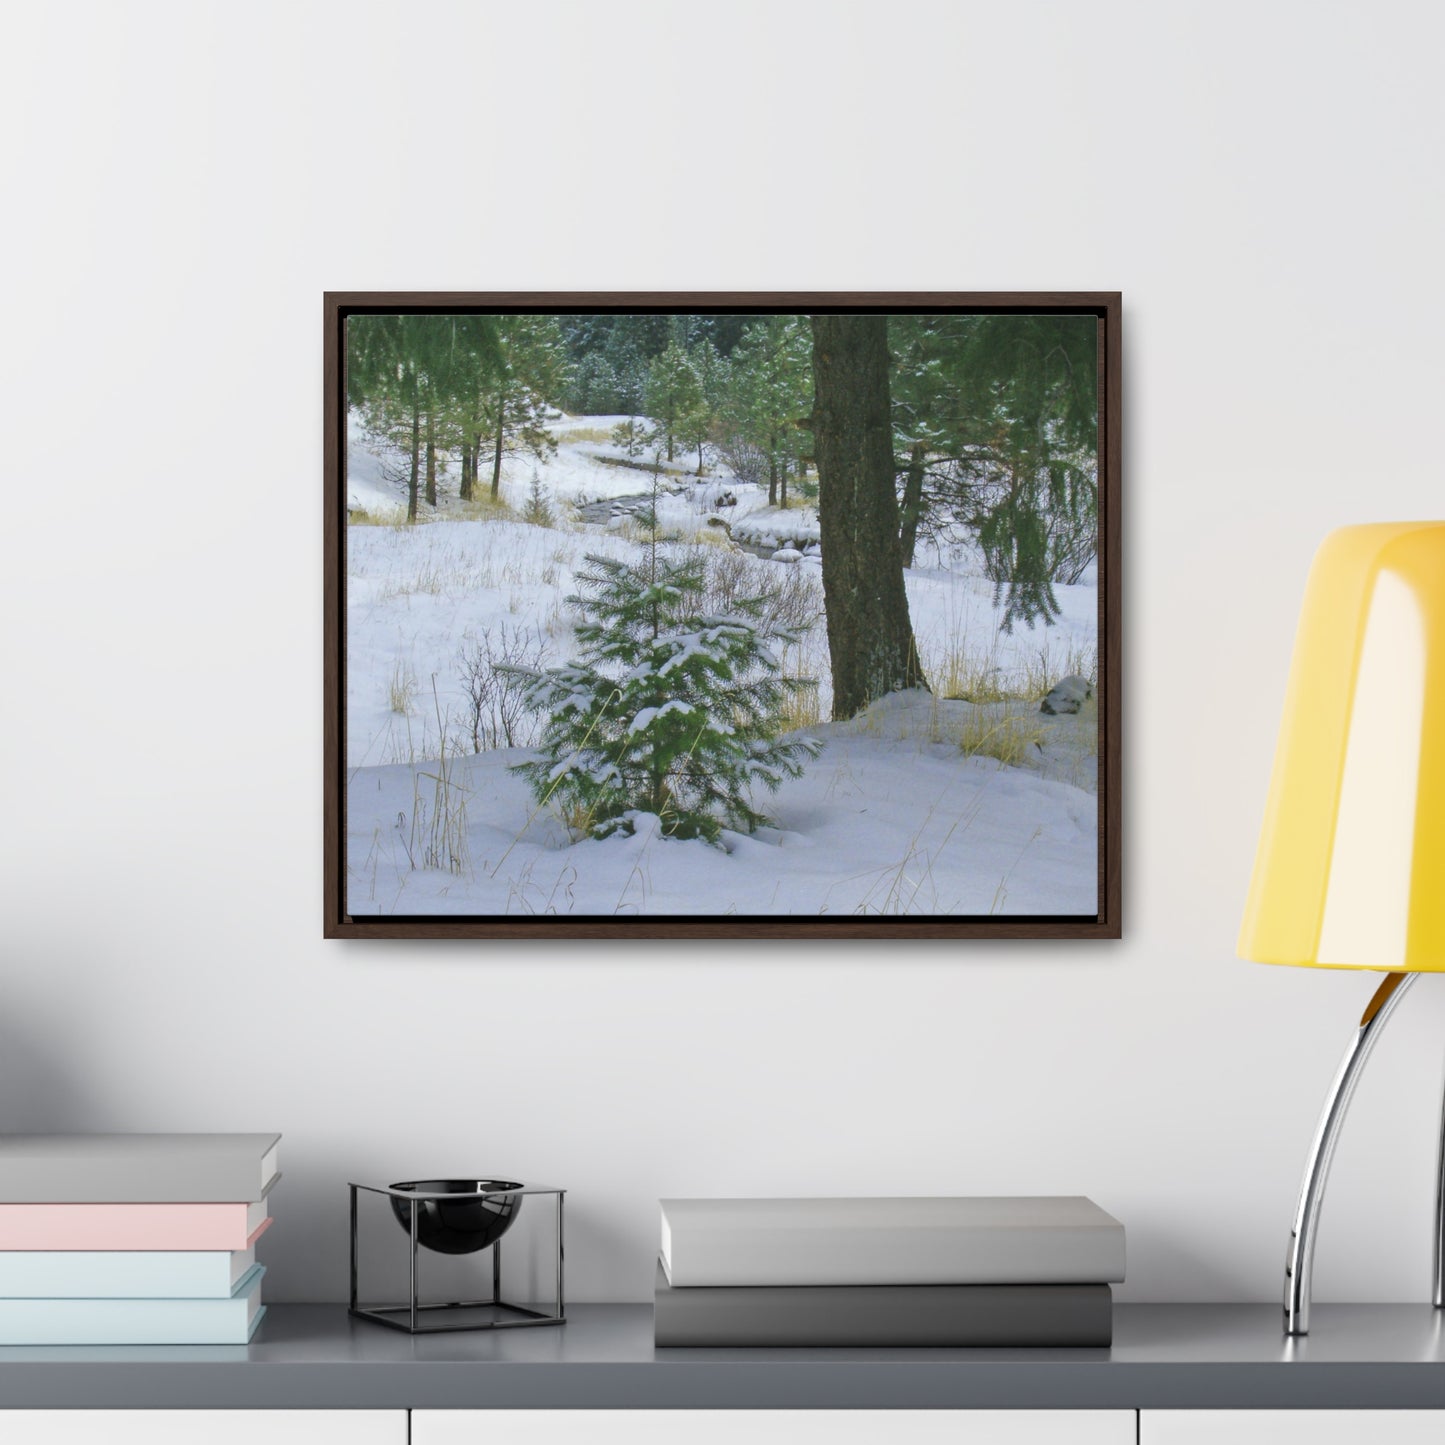 Christmas Tree Creek Gallery Canvas Wraps Framed